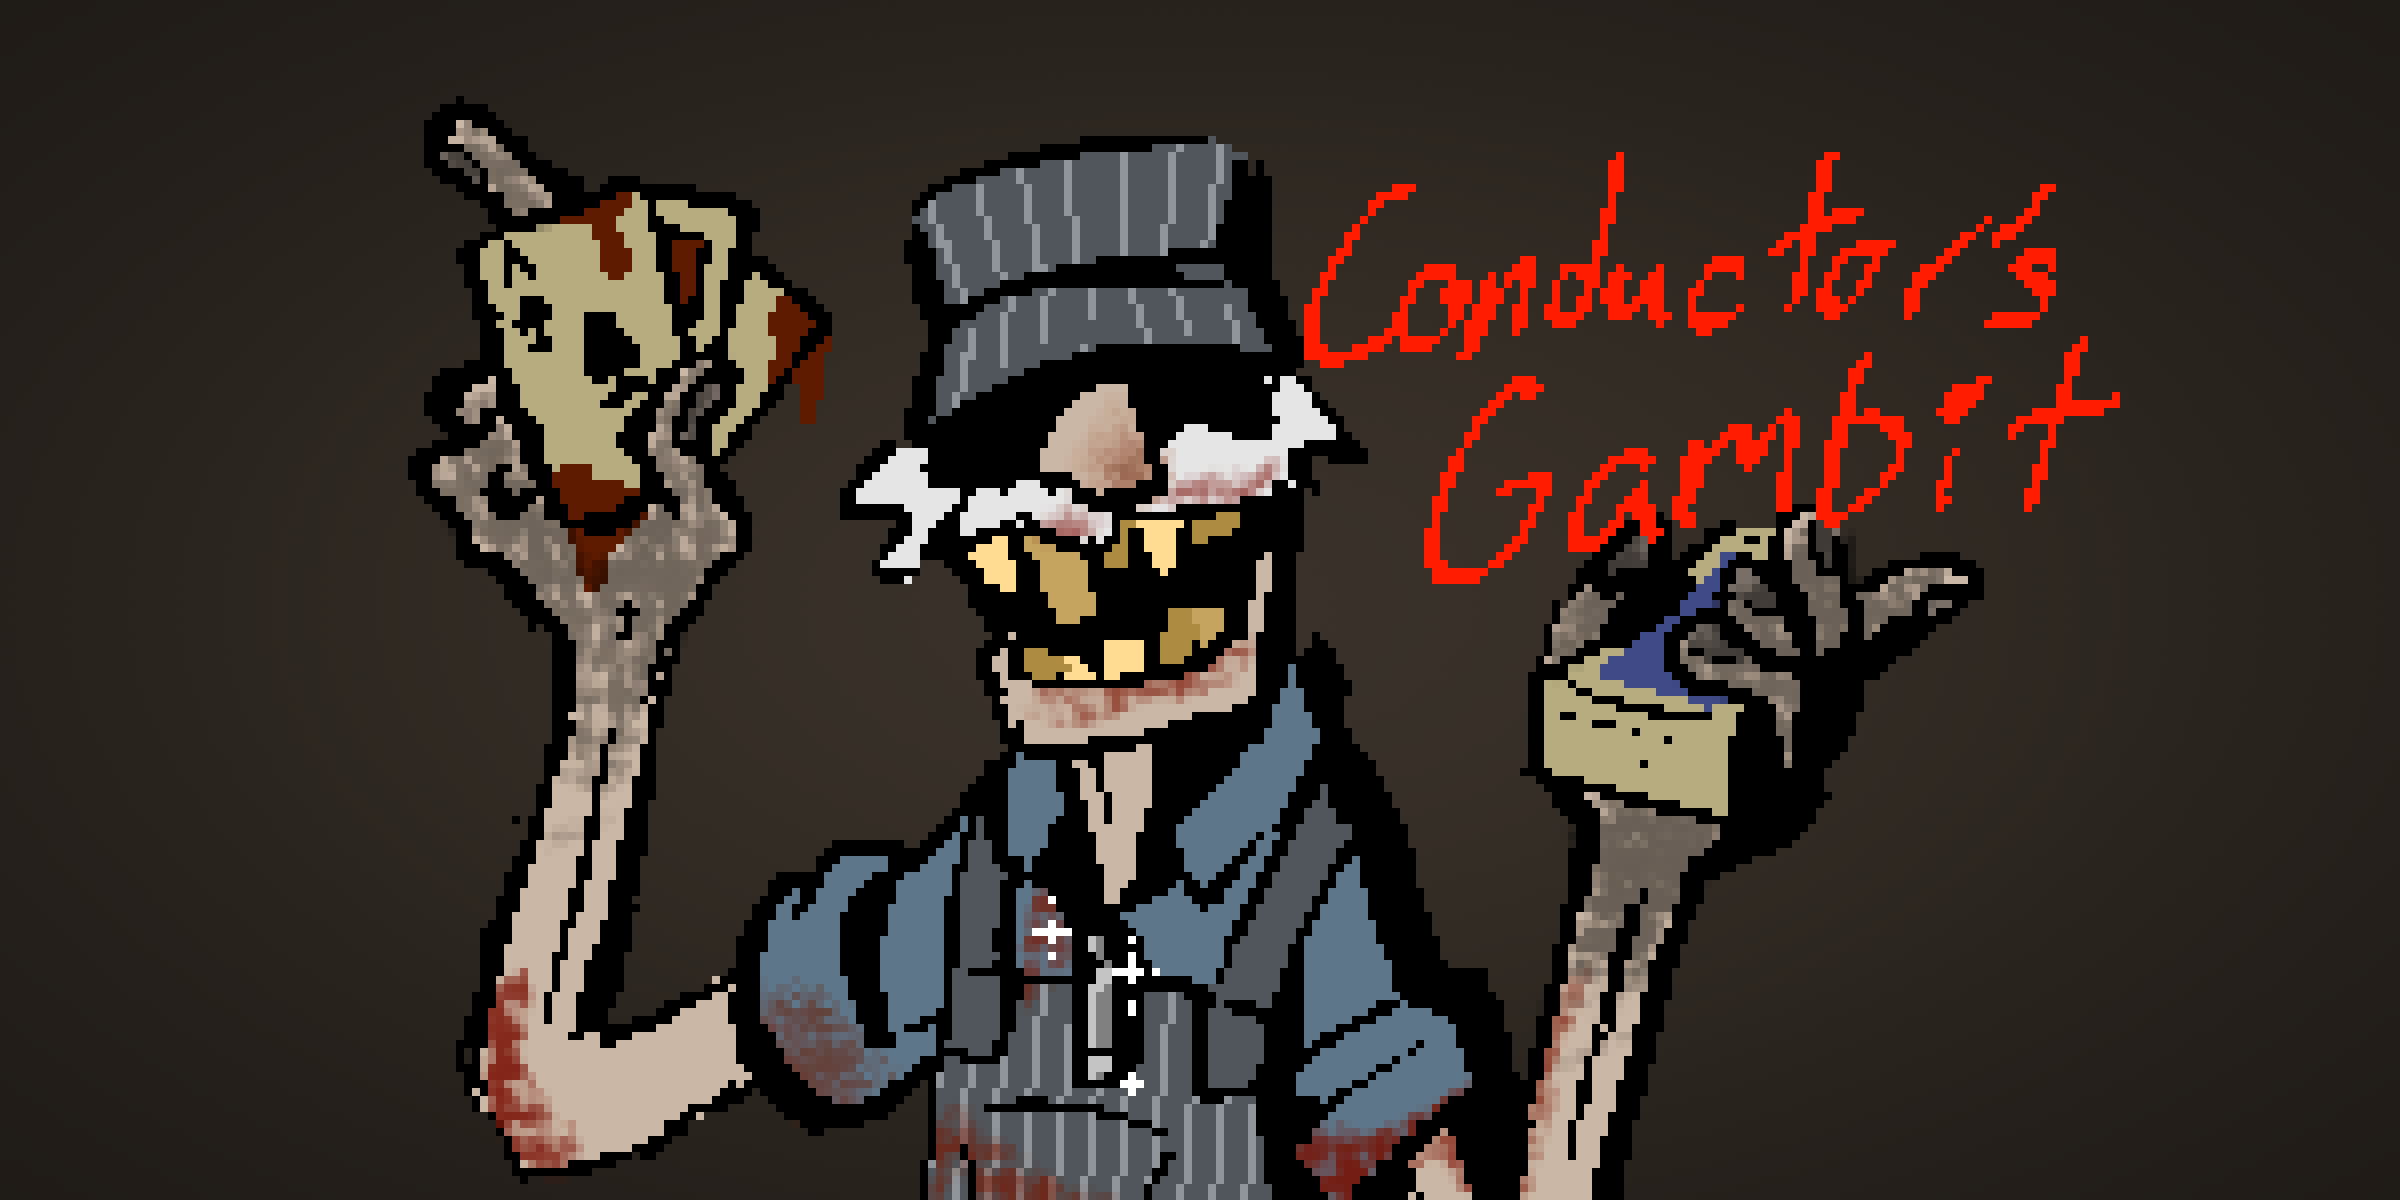 Conductor's Gambit